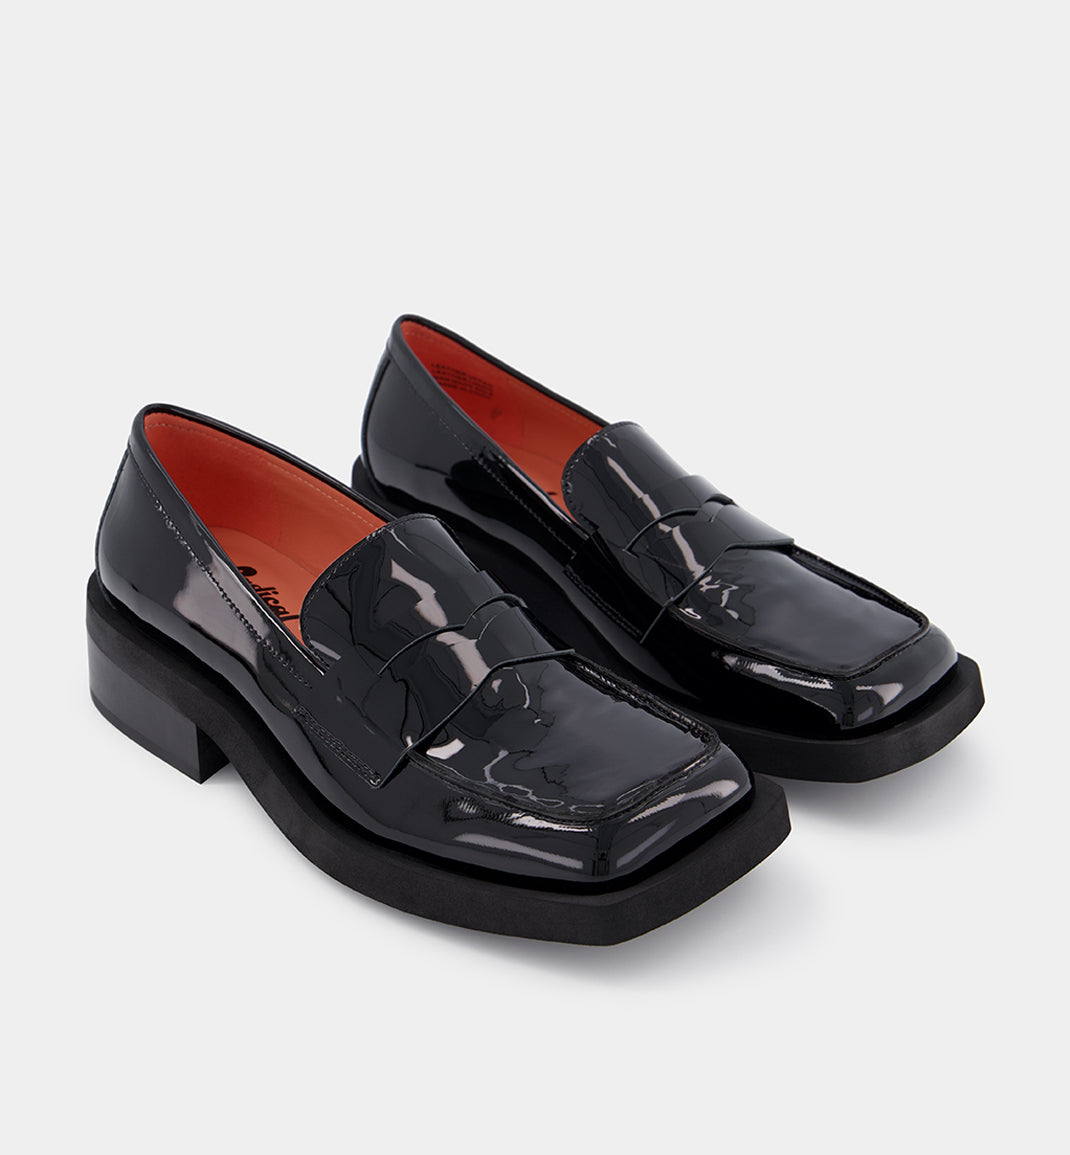 Liberation Toe Patent Leather Loafer Black